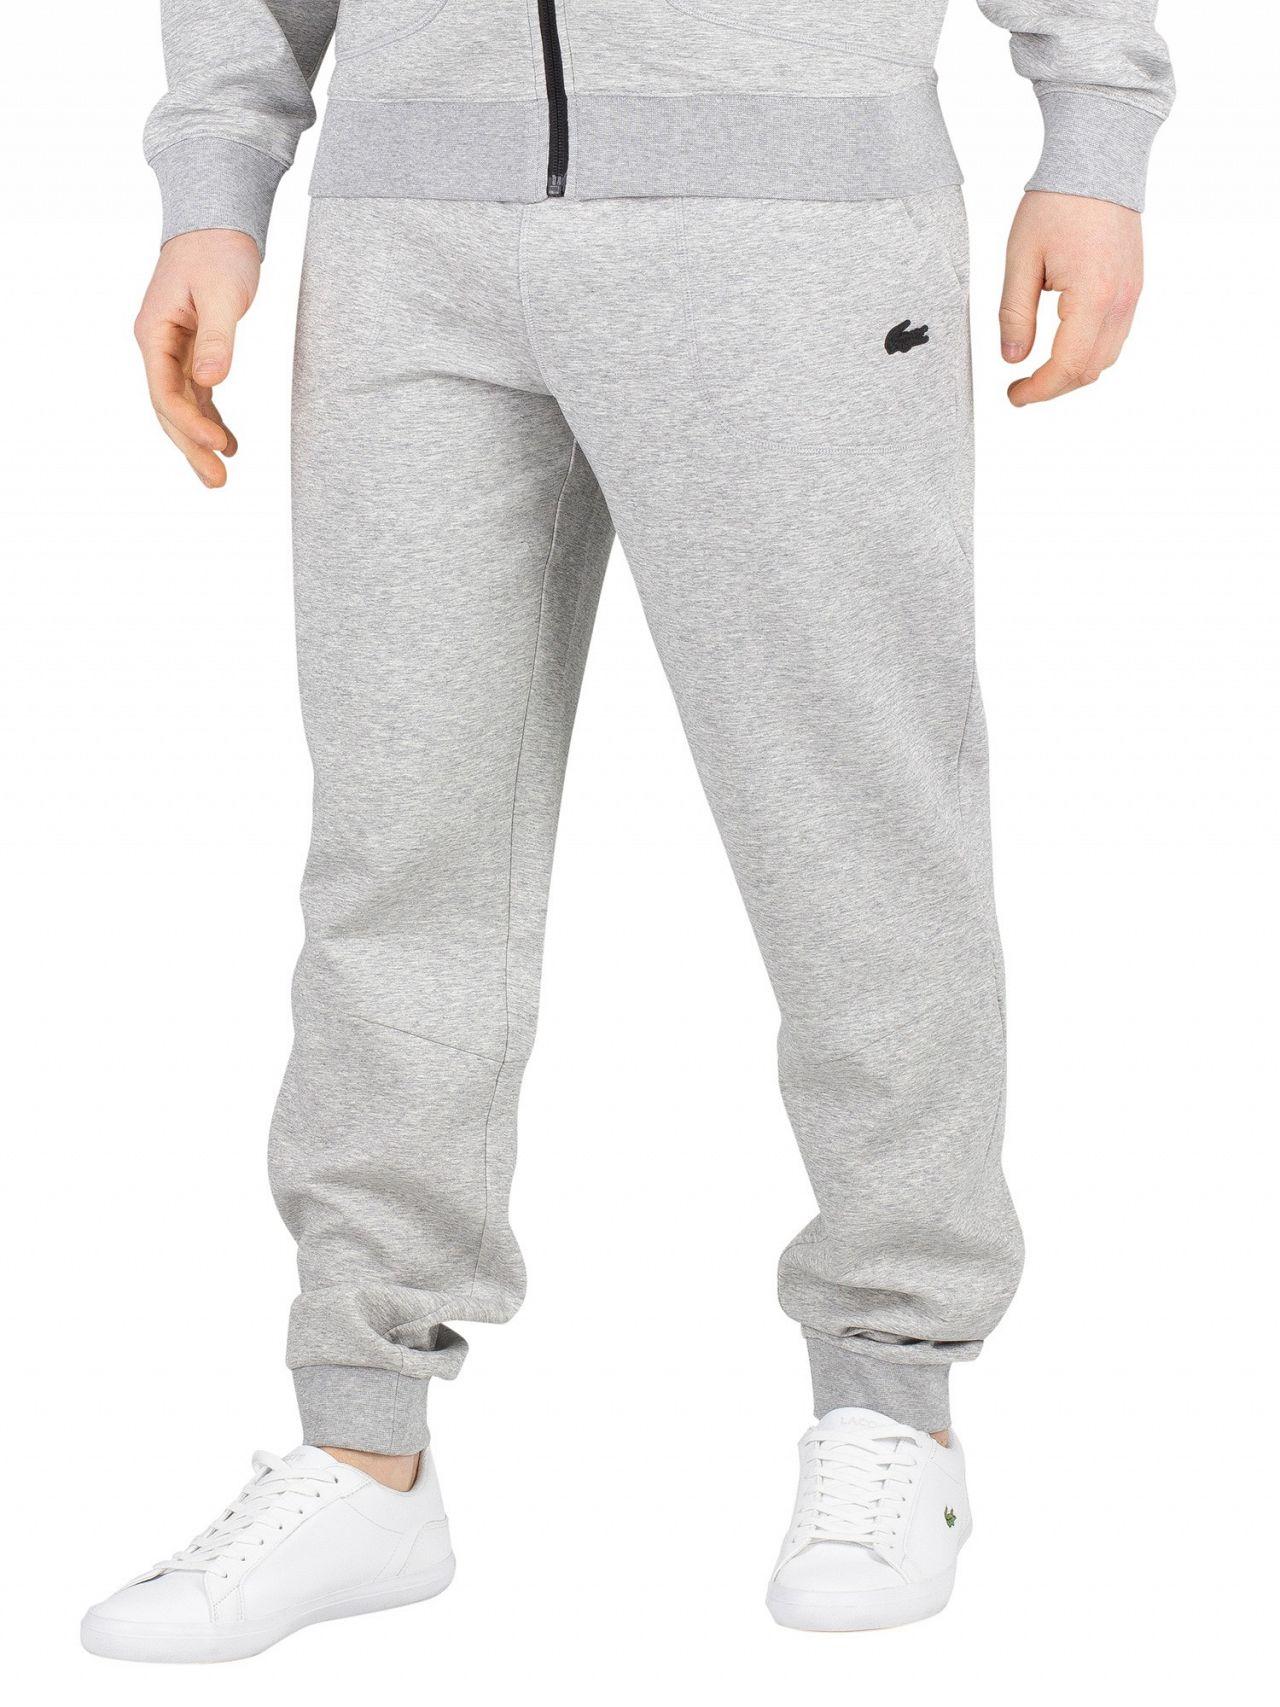 Lyst - Lacoste Grey Motion Joggers in Gray for Men